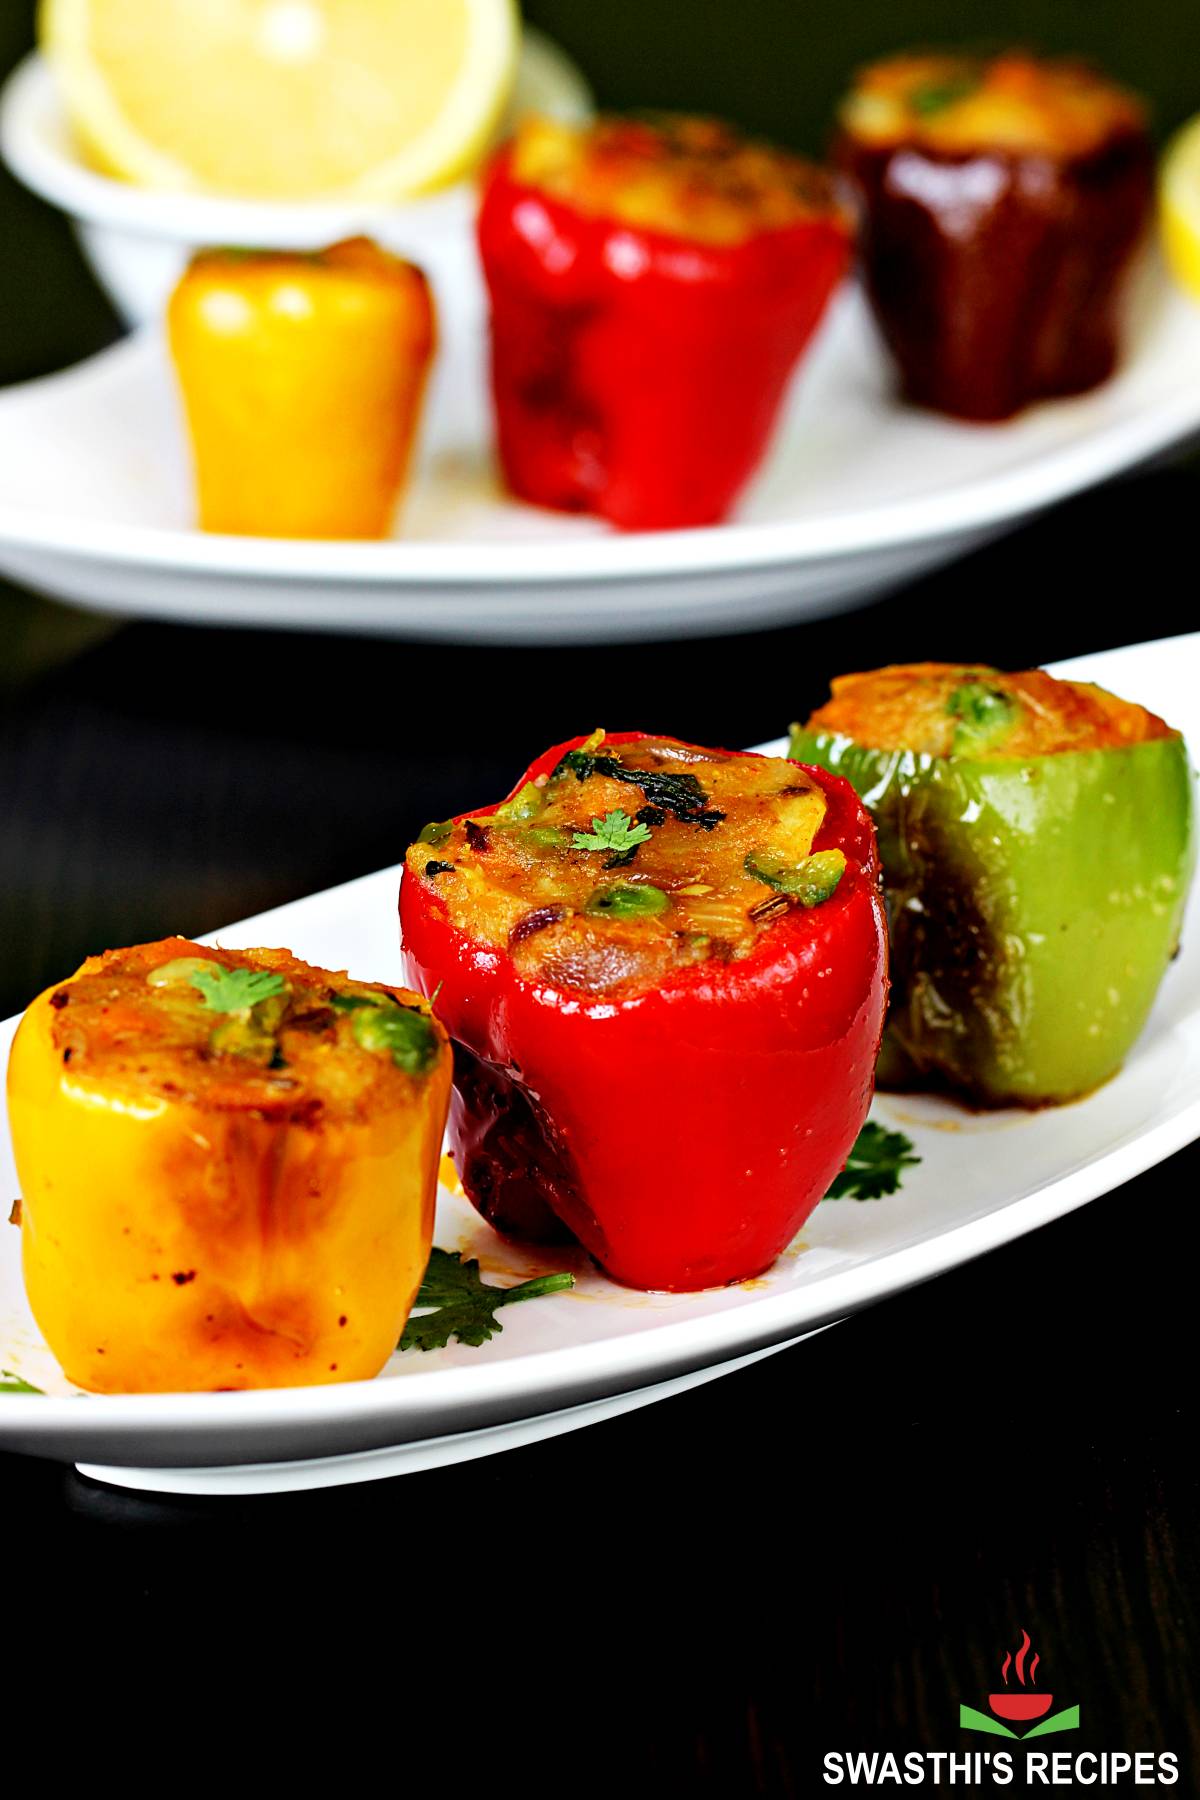 30 Bell Pepper Recipes That Are Creative and Delicious